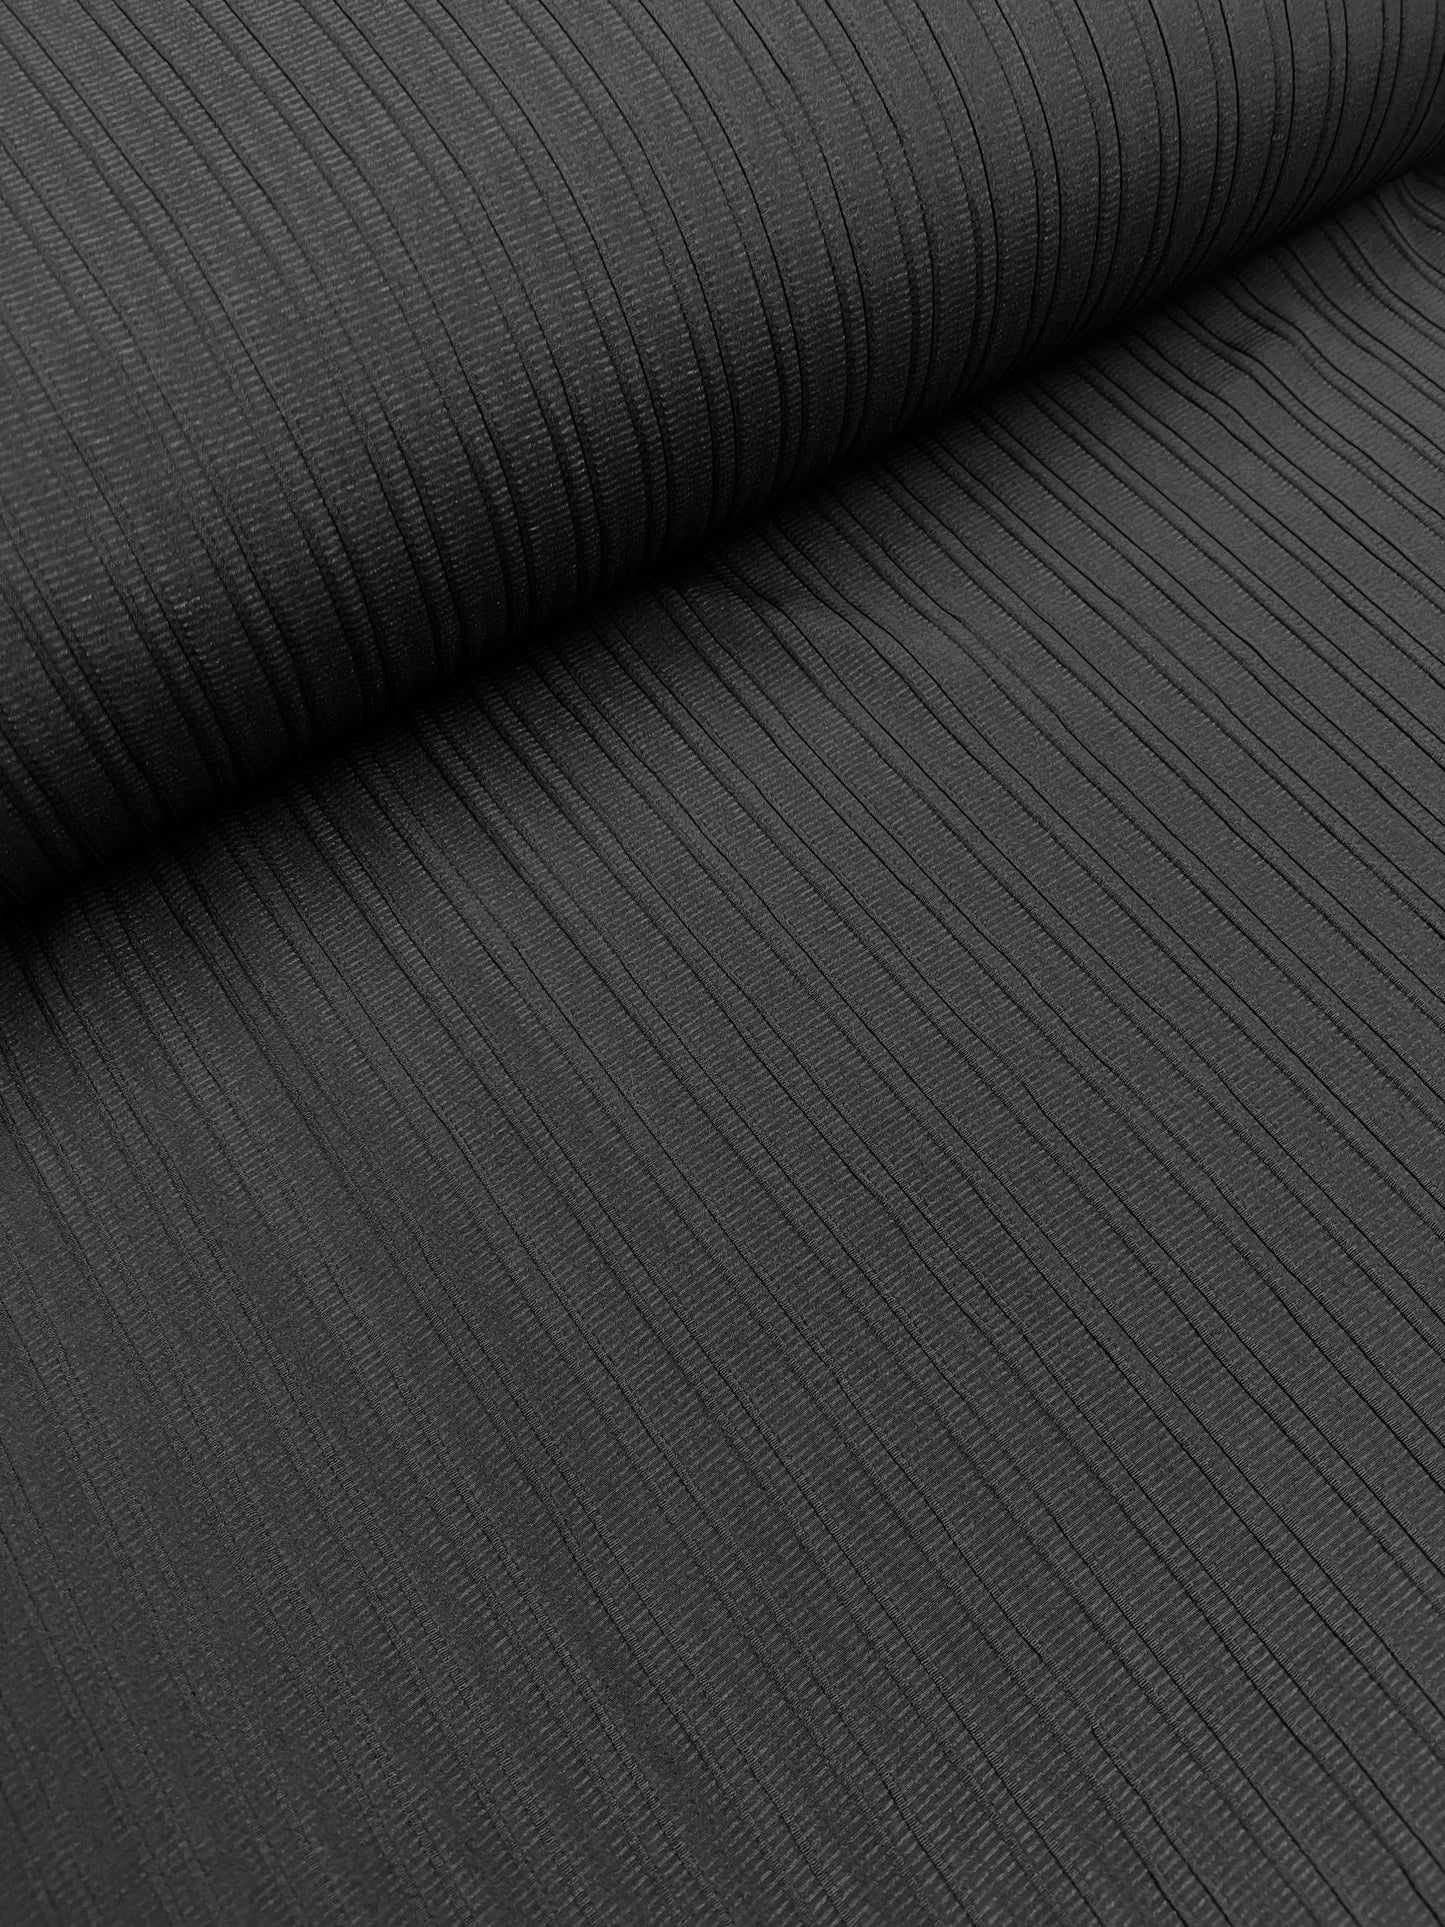 Lined Polyester “Black”